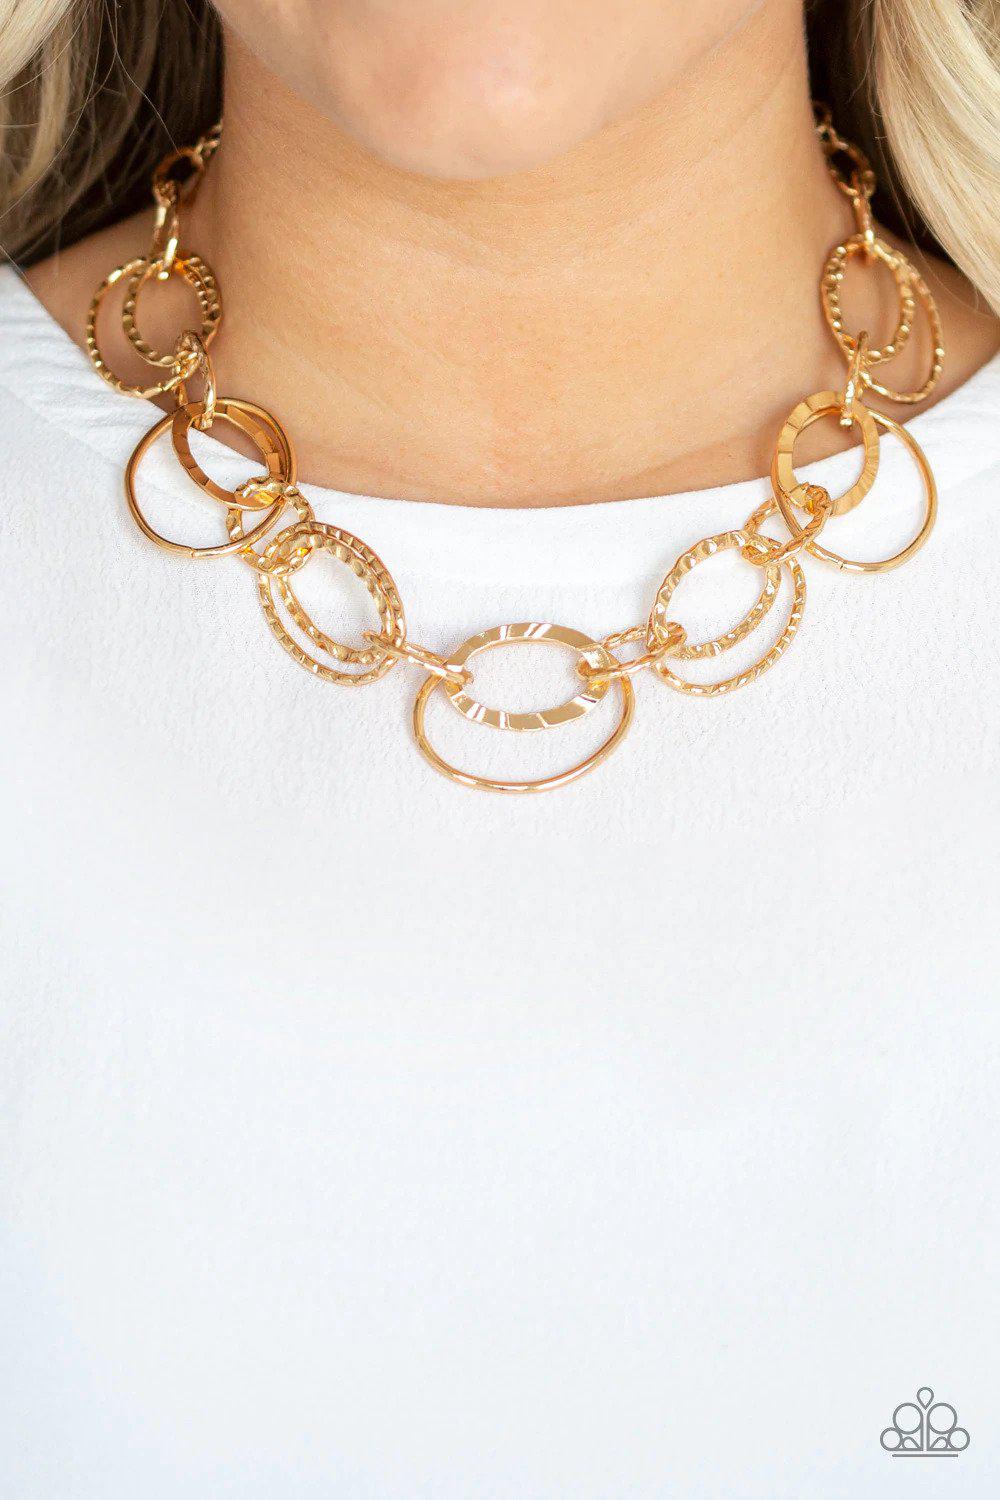 Bend OVAL Backwards Gold Necklace - Paparazzi Accessories- on model - CarasShop.com - $5 Jewelry by Cara Jewels